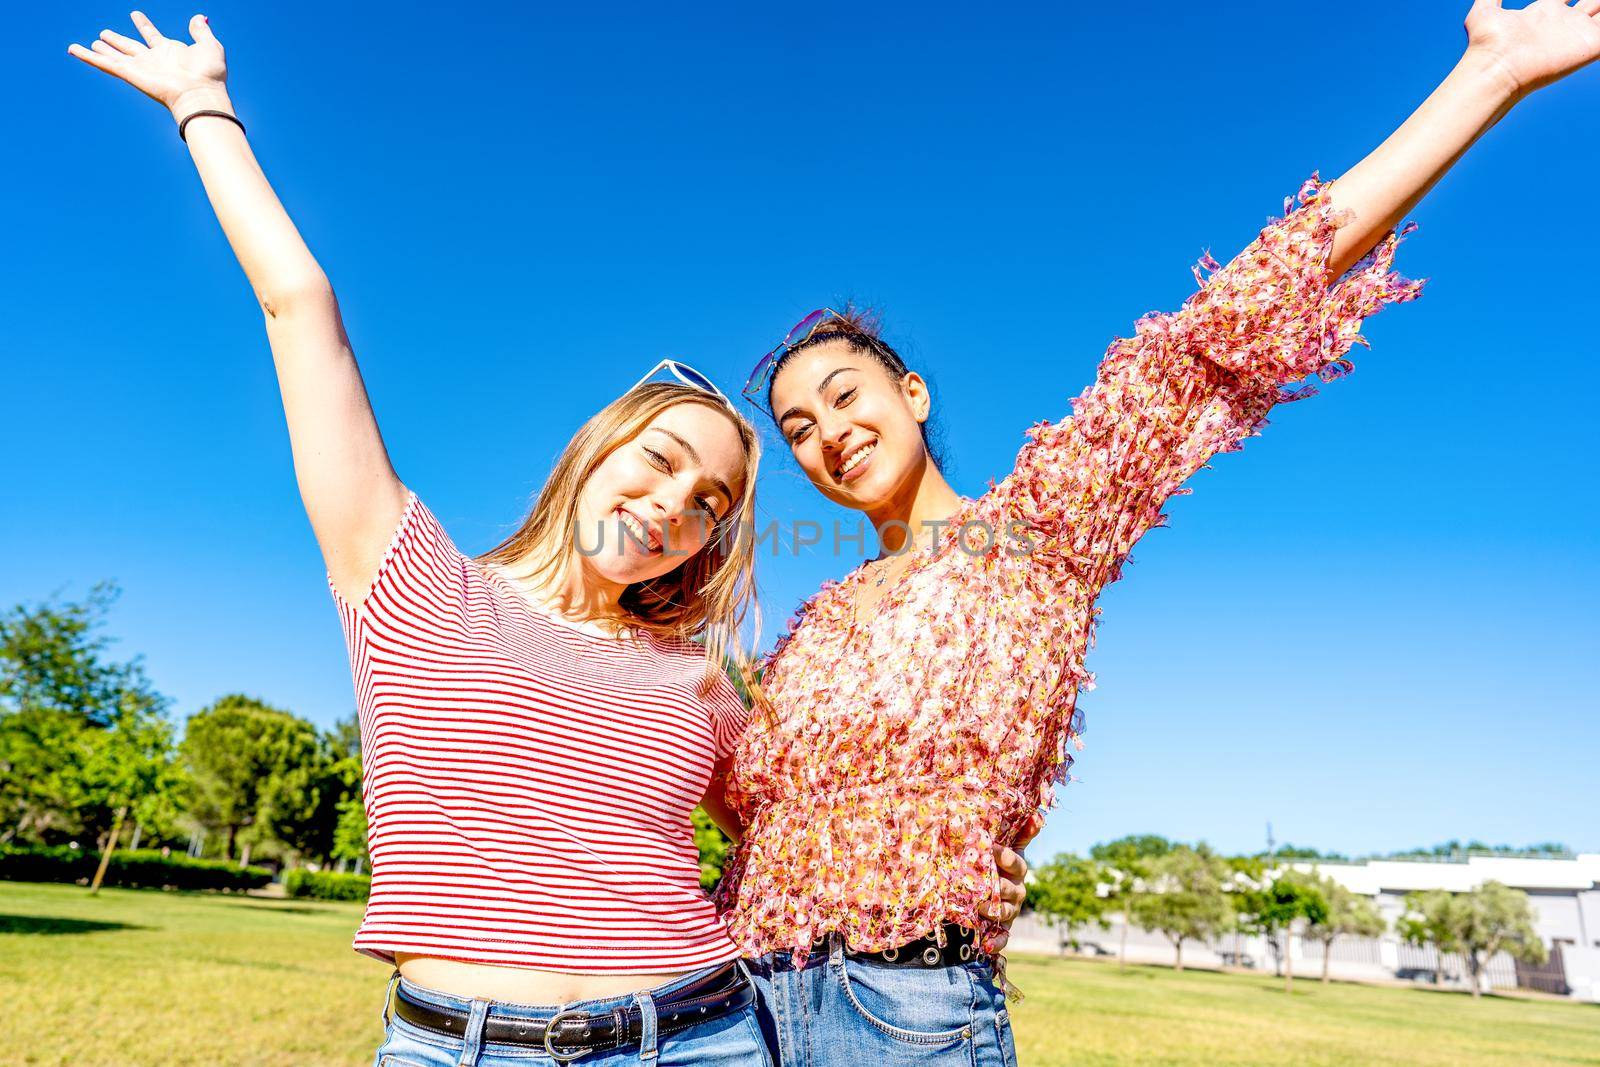 Two happy girls embracing each other with open up arms smiling looking at camera in a city park field in sunny day with blue sky. Mixed young women couple enjoying nature celebrating their diversity by robbyfontanesi